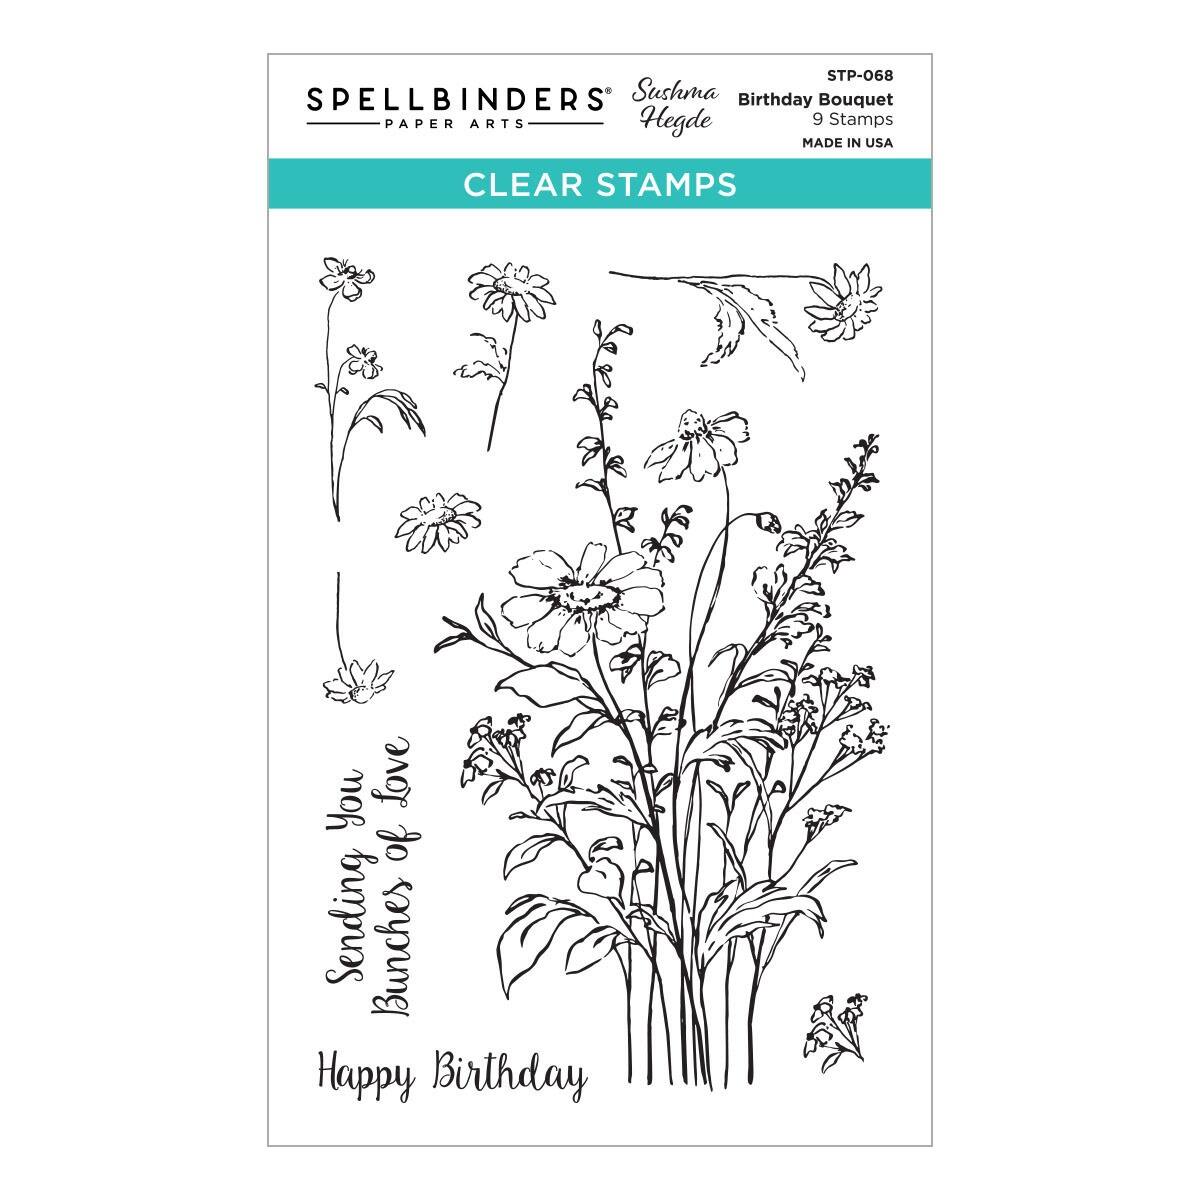 Treats Clear Stamp & Die-Cut Set by Recollections | Michaels